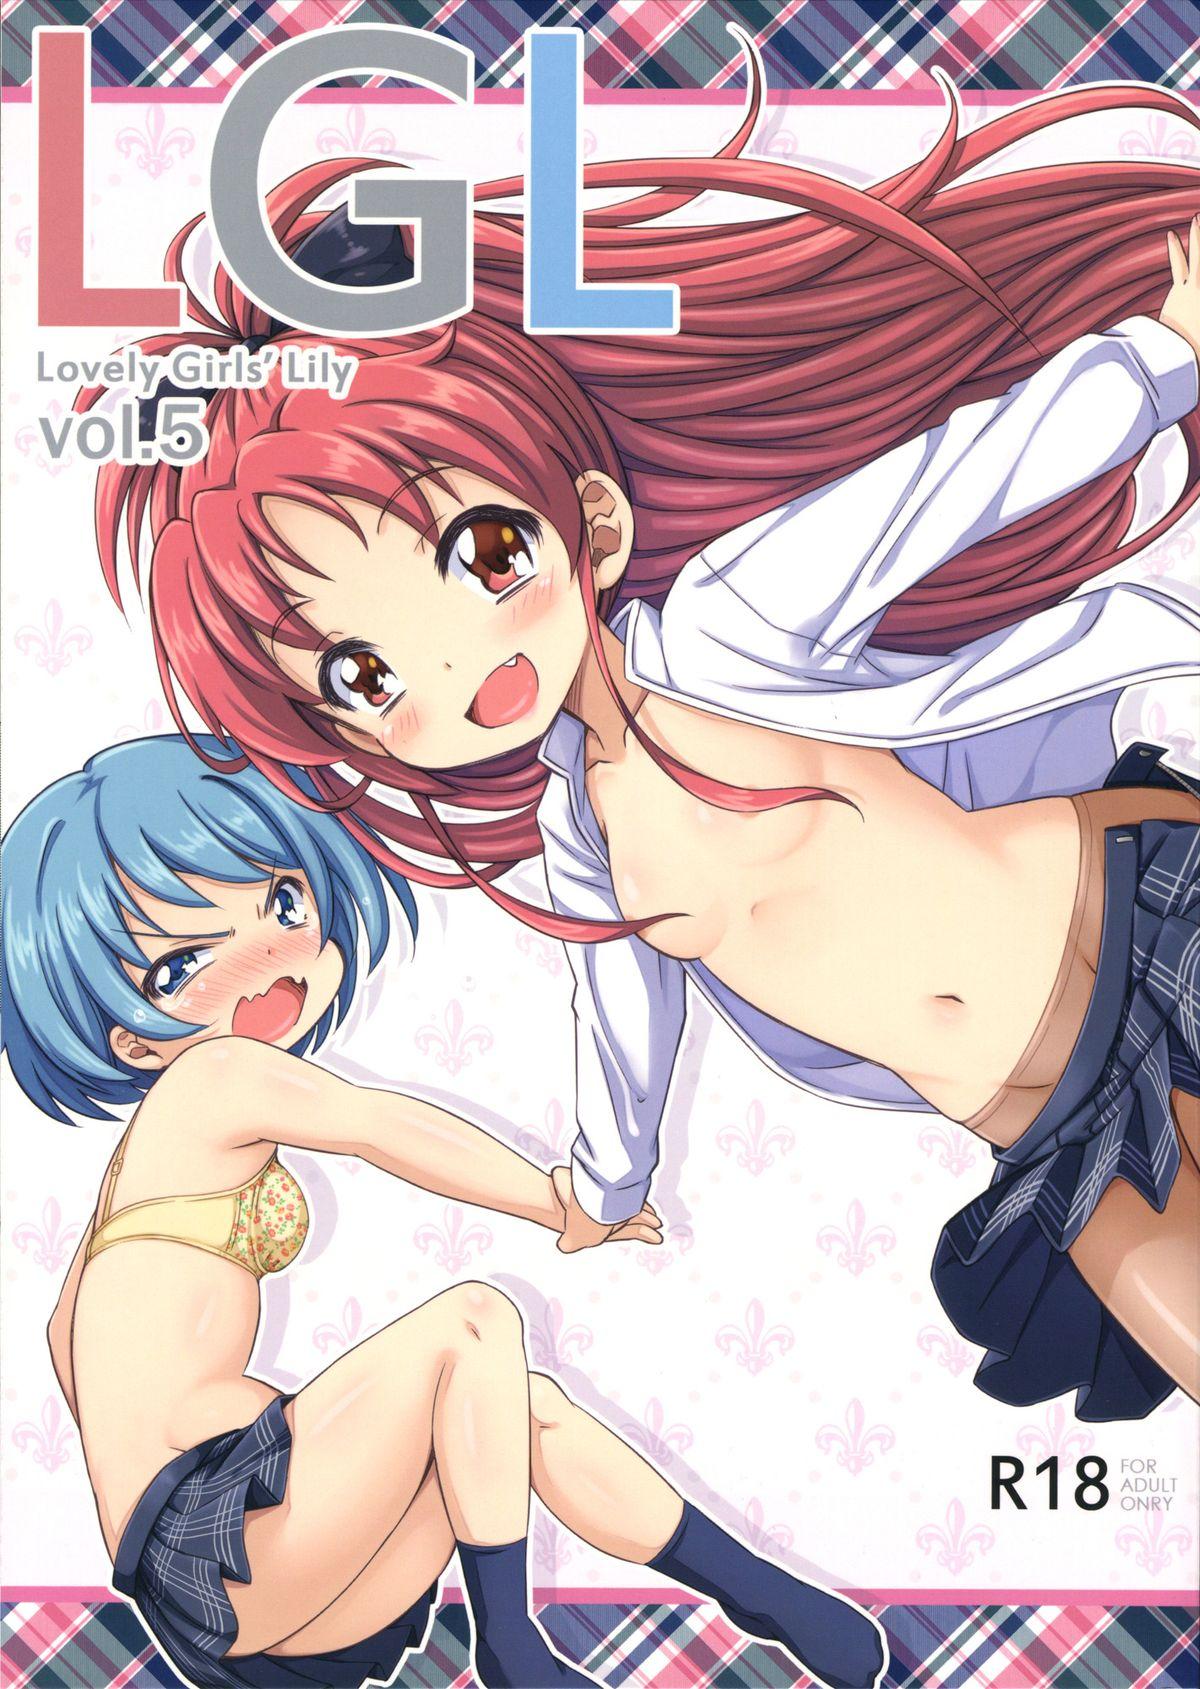 Glamour Porn Lovely Girls' Lily Vol. 5 - Puella magi madoka magica Licking - Picture 1